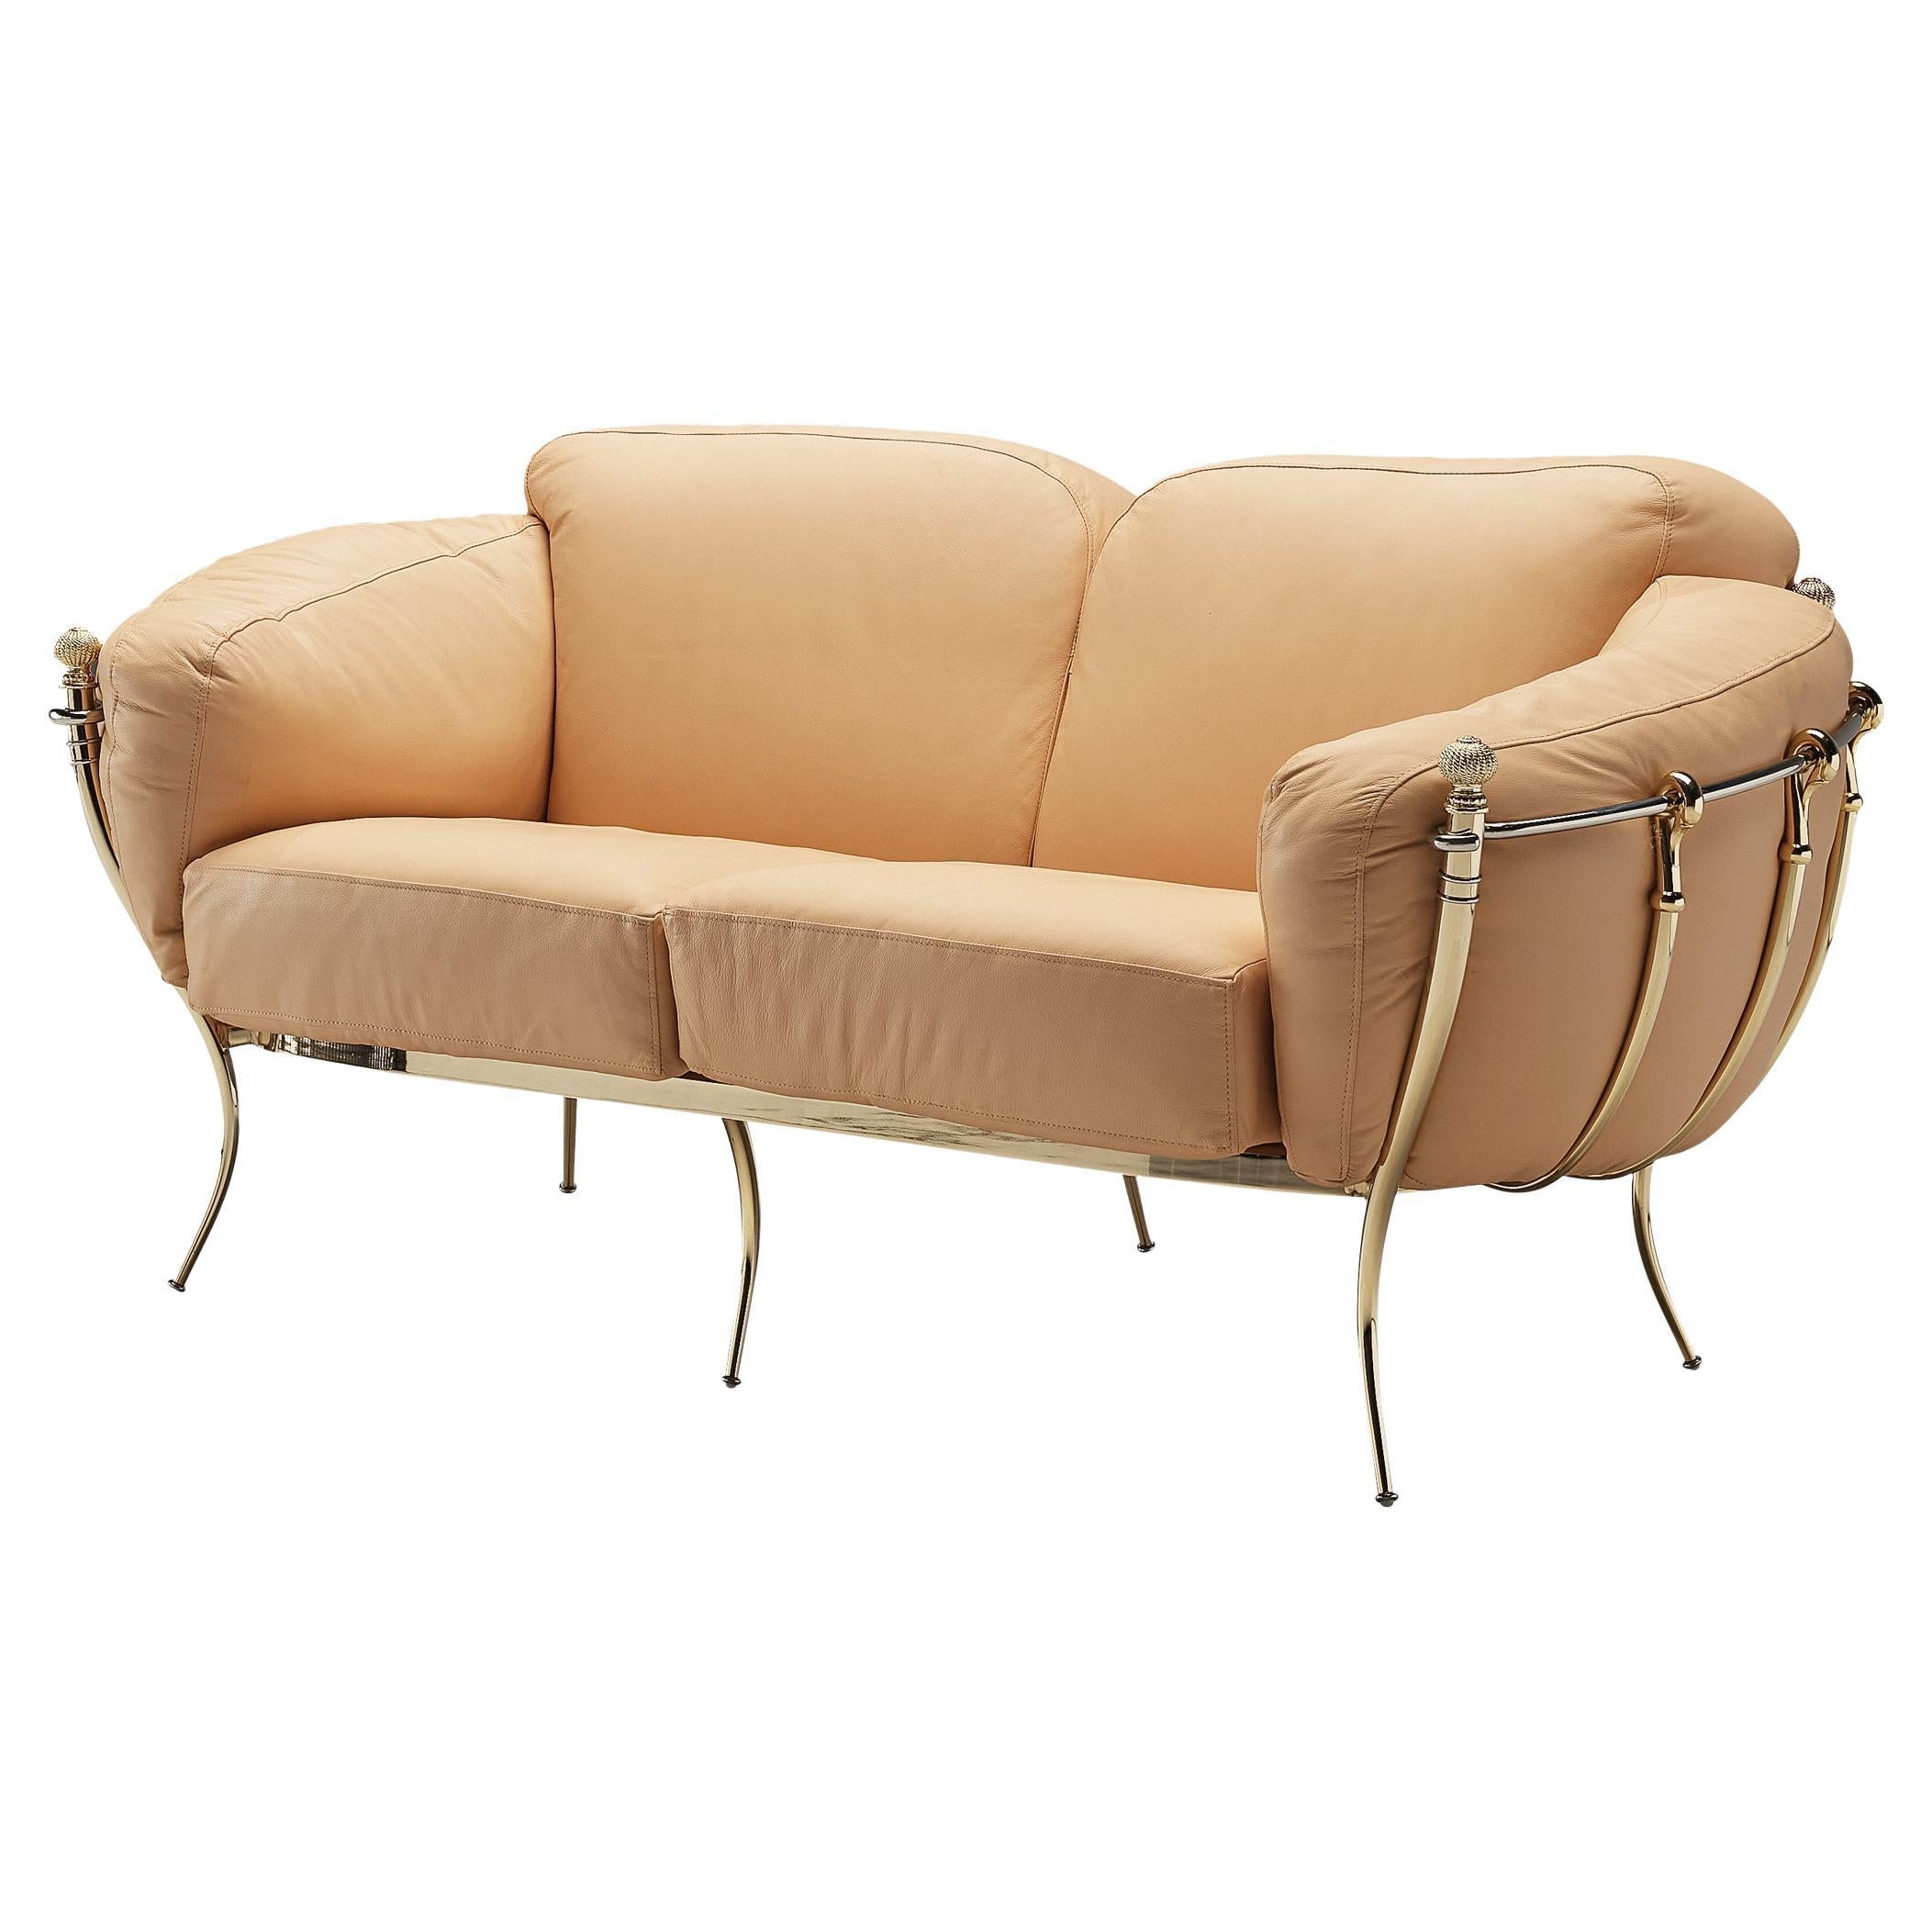 Spanish Sofa in Peach Leather and Brass